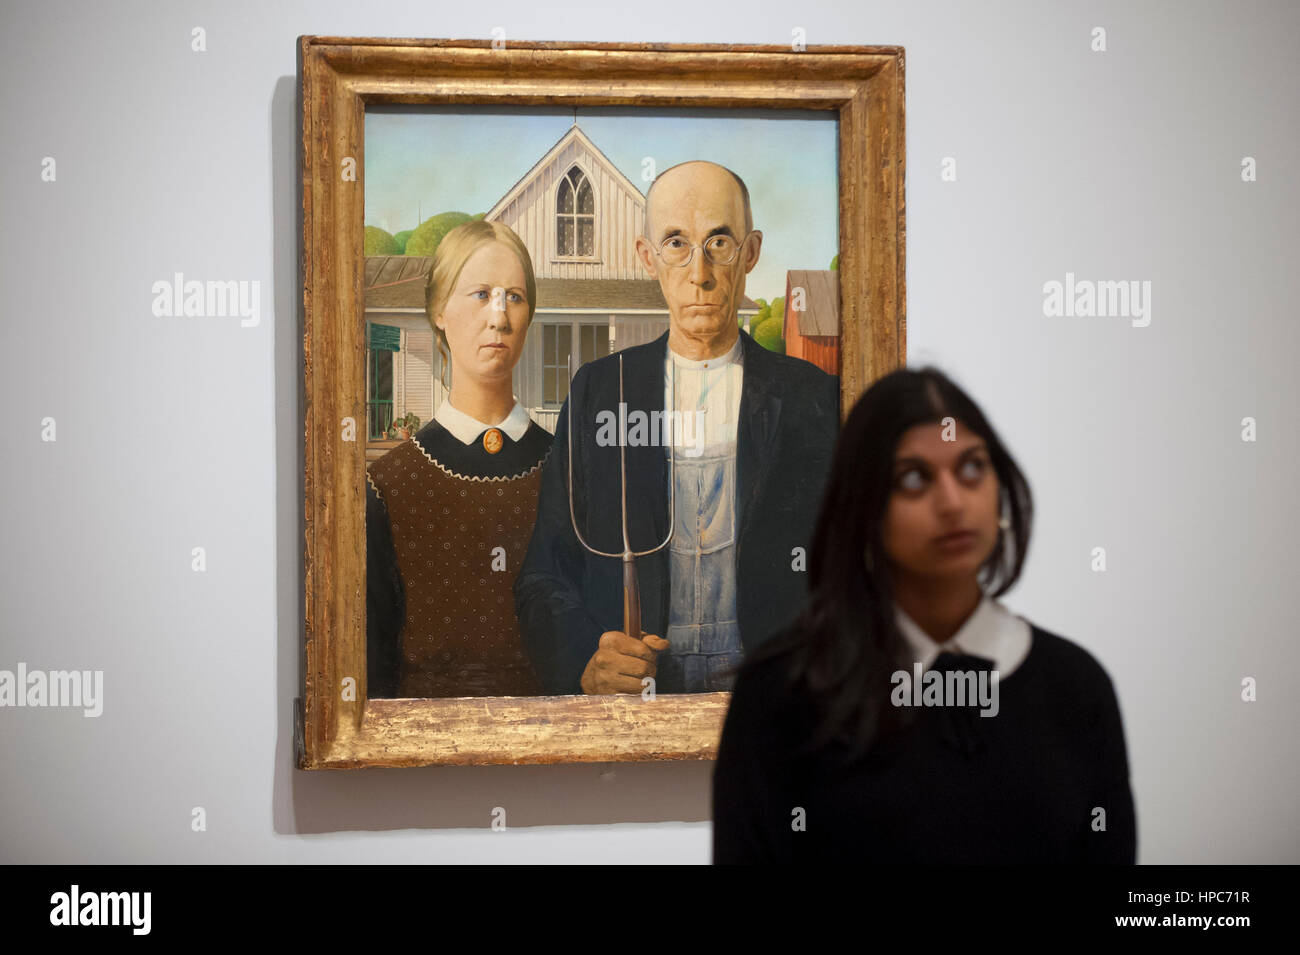 London, UK. 21st Feb, 2017. A staff member stands with 'American Gothic', 1930 by Grant Wood, at the preview of 'America after the Fall: Painting in the 1930s', an exhibition of 45 seminal paintings chronicling the impact of the decade following the Wall Street Crash of 1929. Credit: Stephen Chung/Alamy Live News Stock Photo